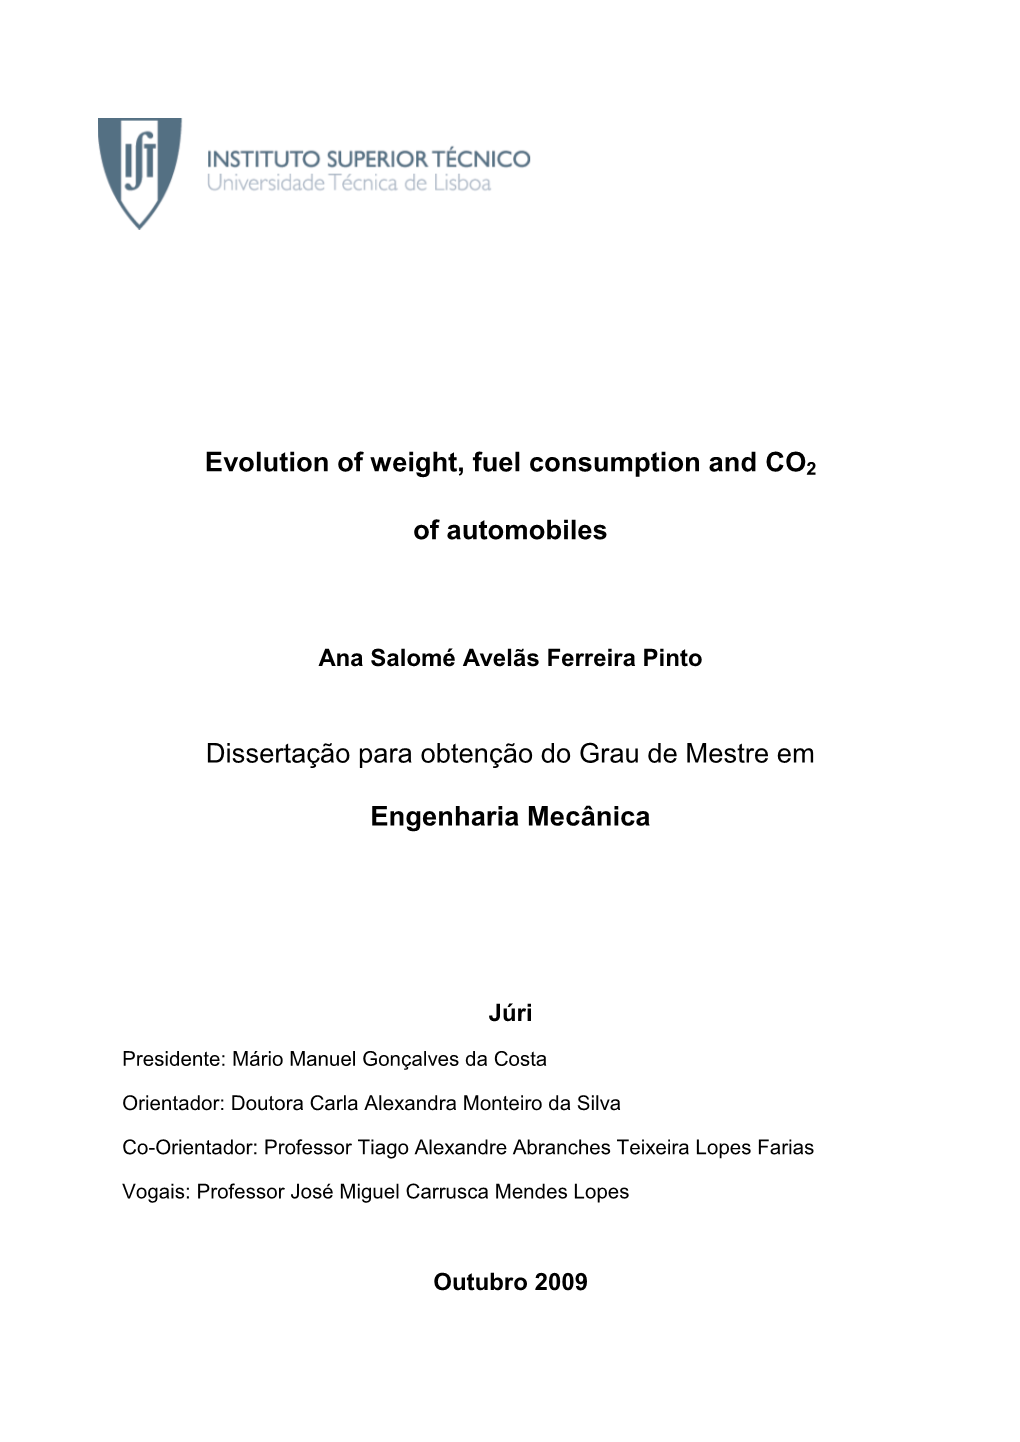 Evolution of Weight, Fuel Consumption and CO2 of Automobiles